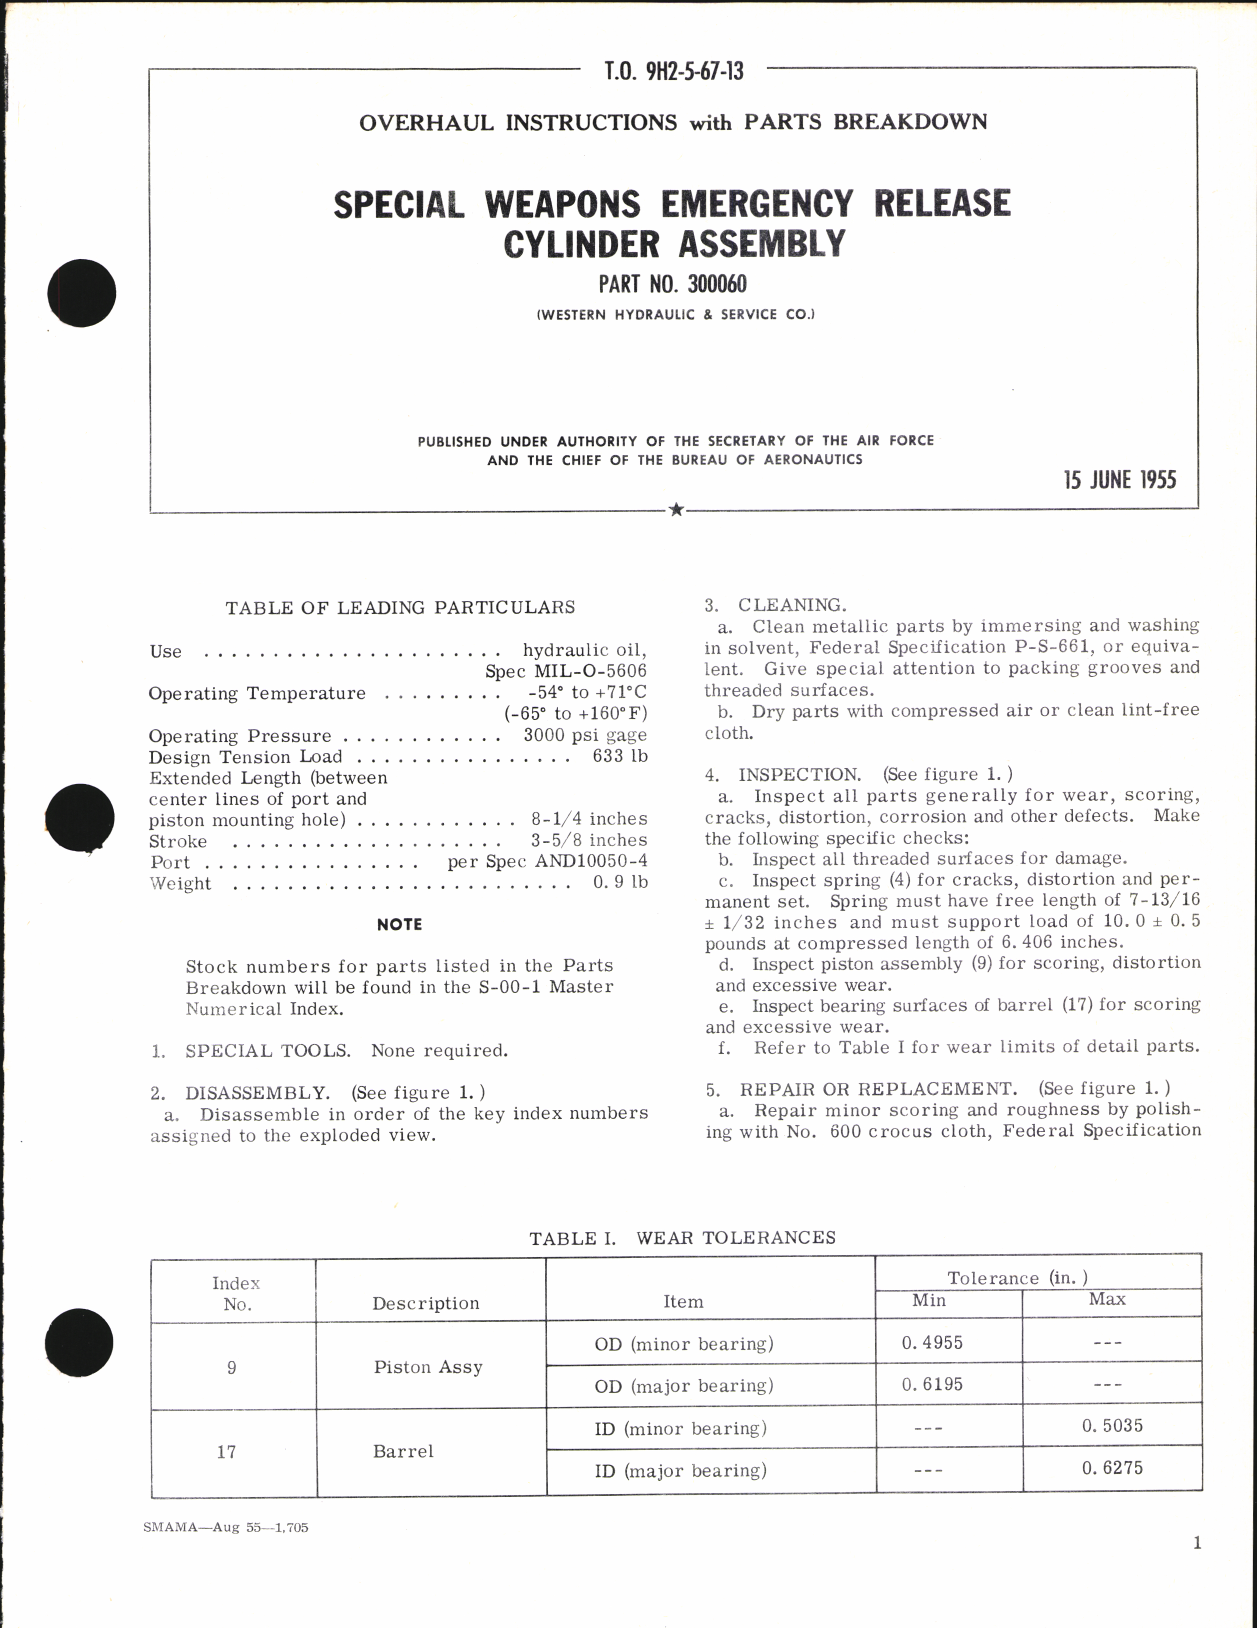 Sample page 1 from AirCorps Library document: Overhaul Instructions with Parts Breakdown for Special Weapons Emergency Release Cylinder Assembly Part No. 300060